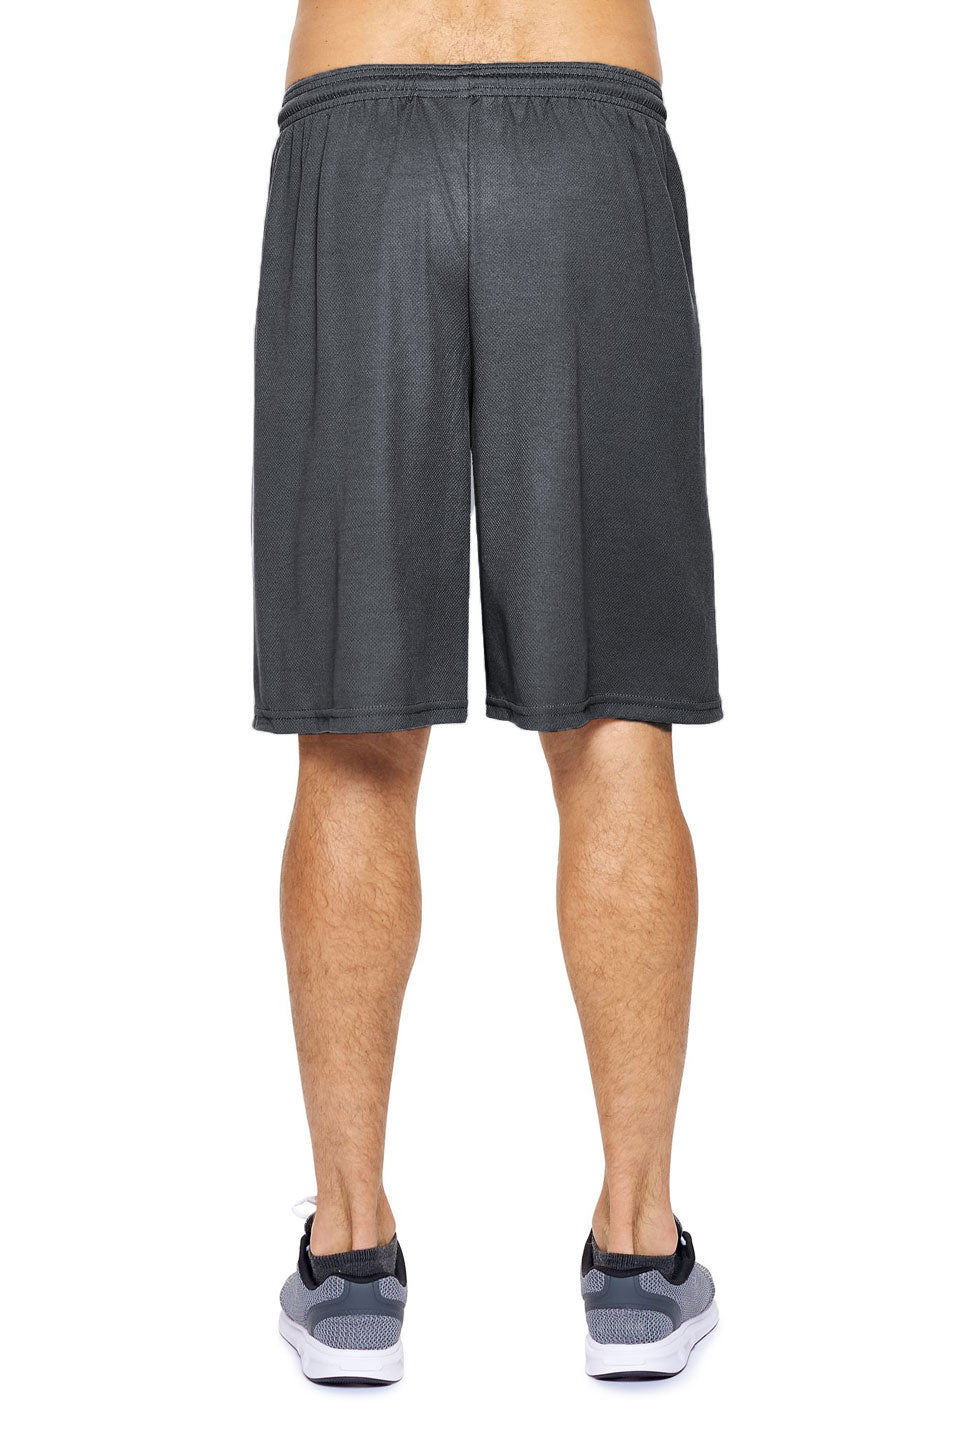 Expert Brand Wholesale Men's Made in USA Oxymesh Training Shorts in Graphite image 3#graphite